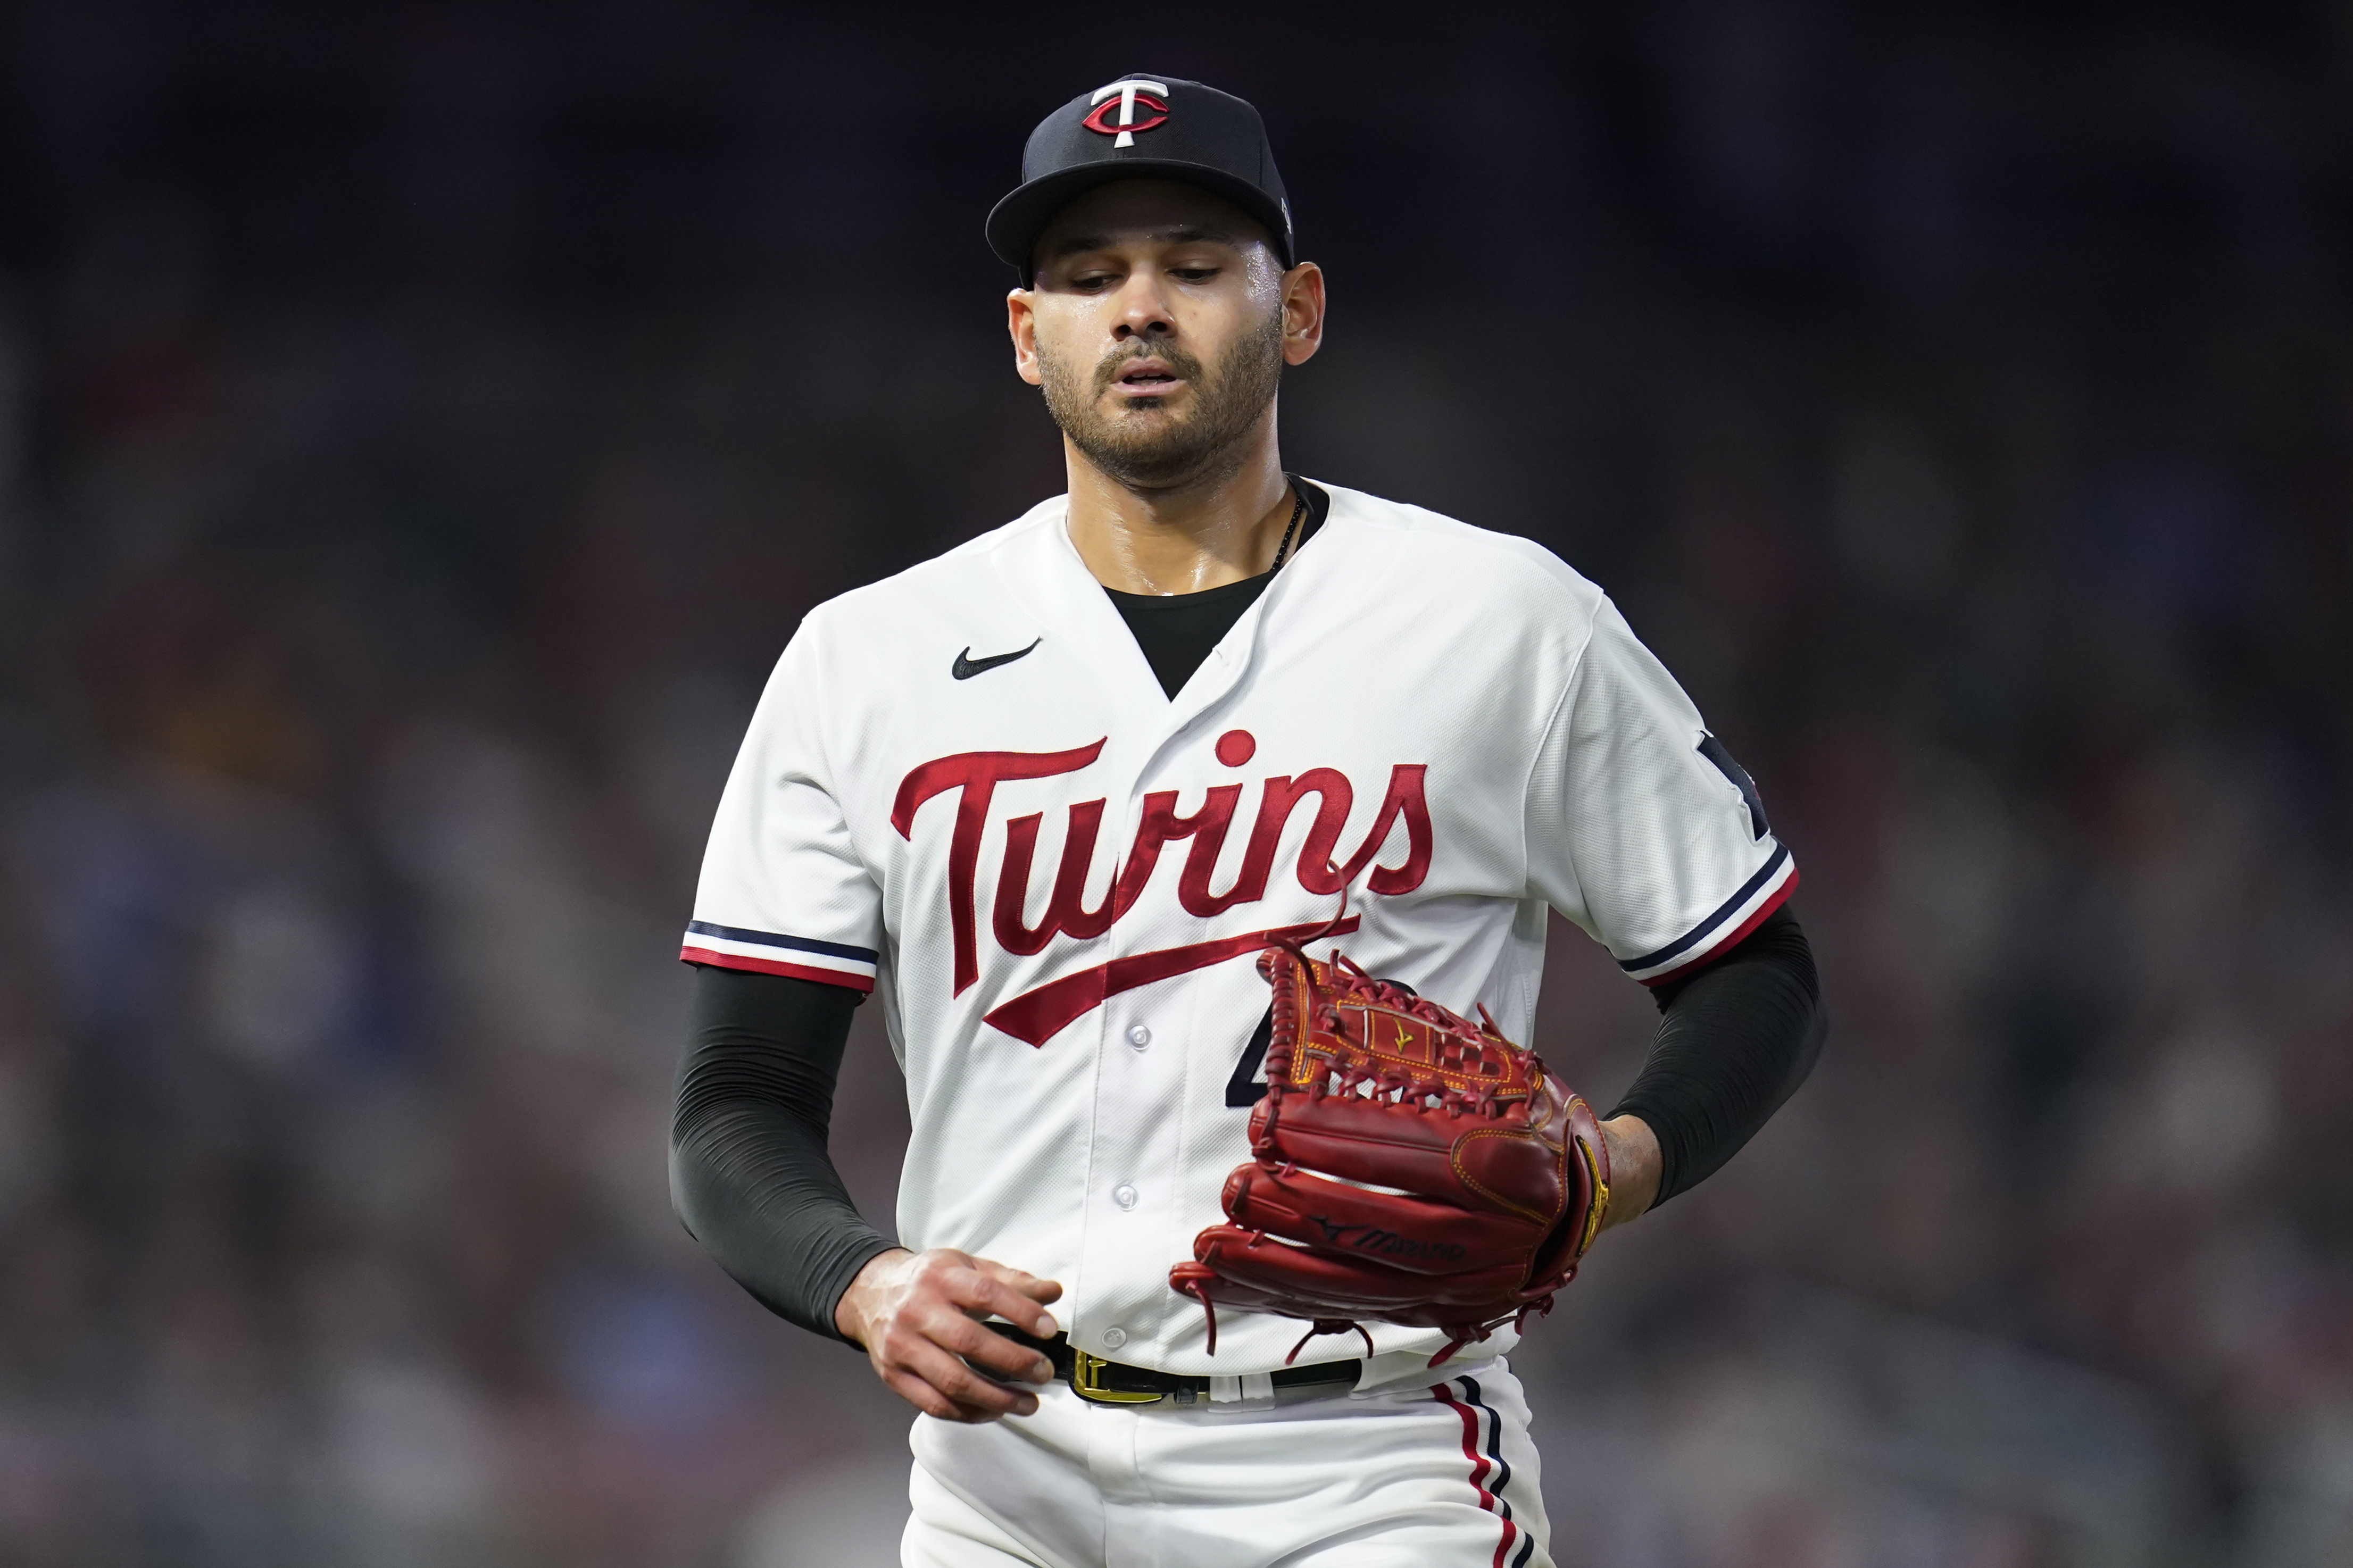 TWINS WIN! Minnesota clinches the AL Central at Target Field 